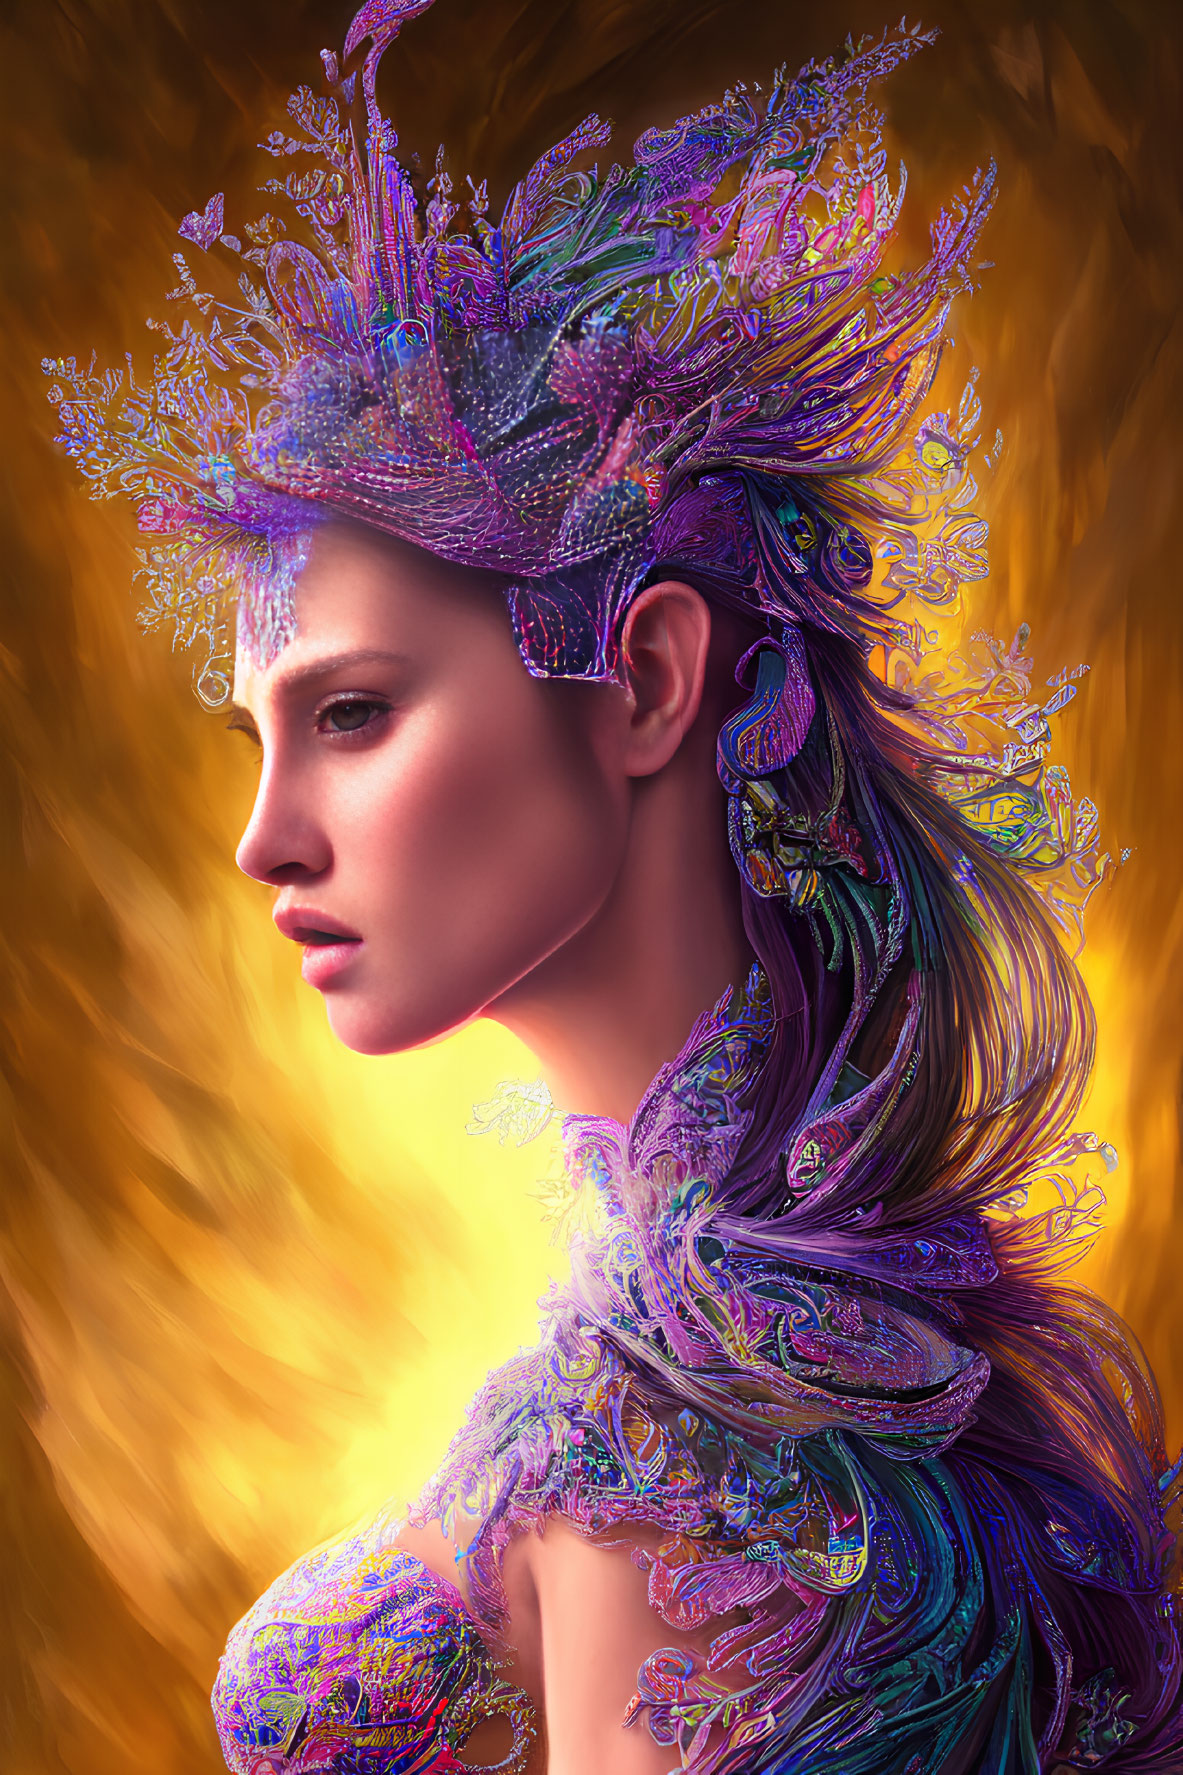 Colorful Woman's Profile Portrait with Elaborate Headdress and Garment